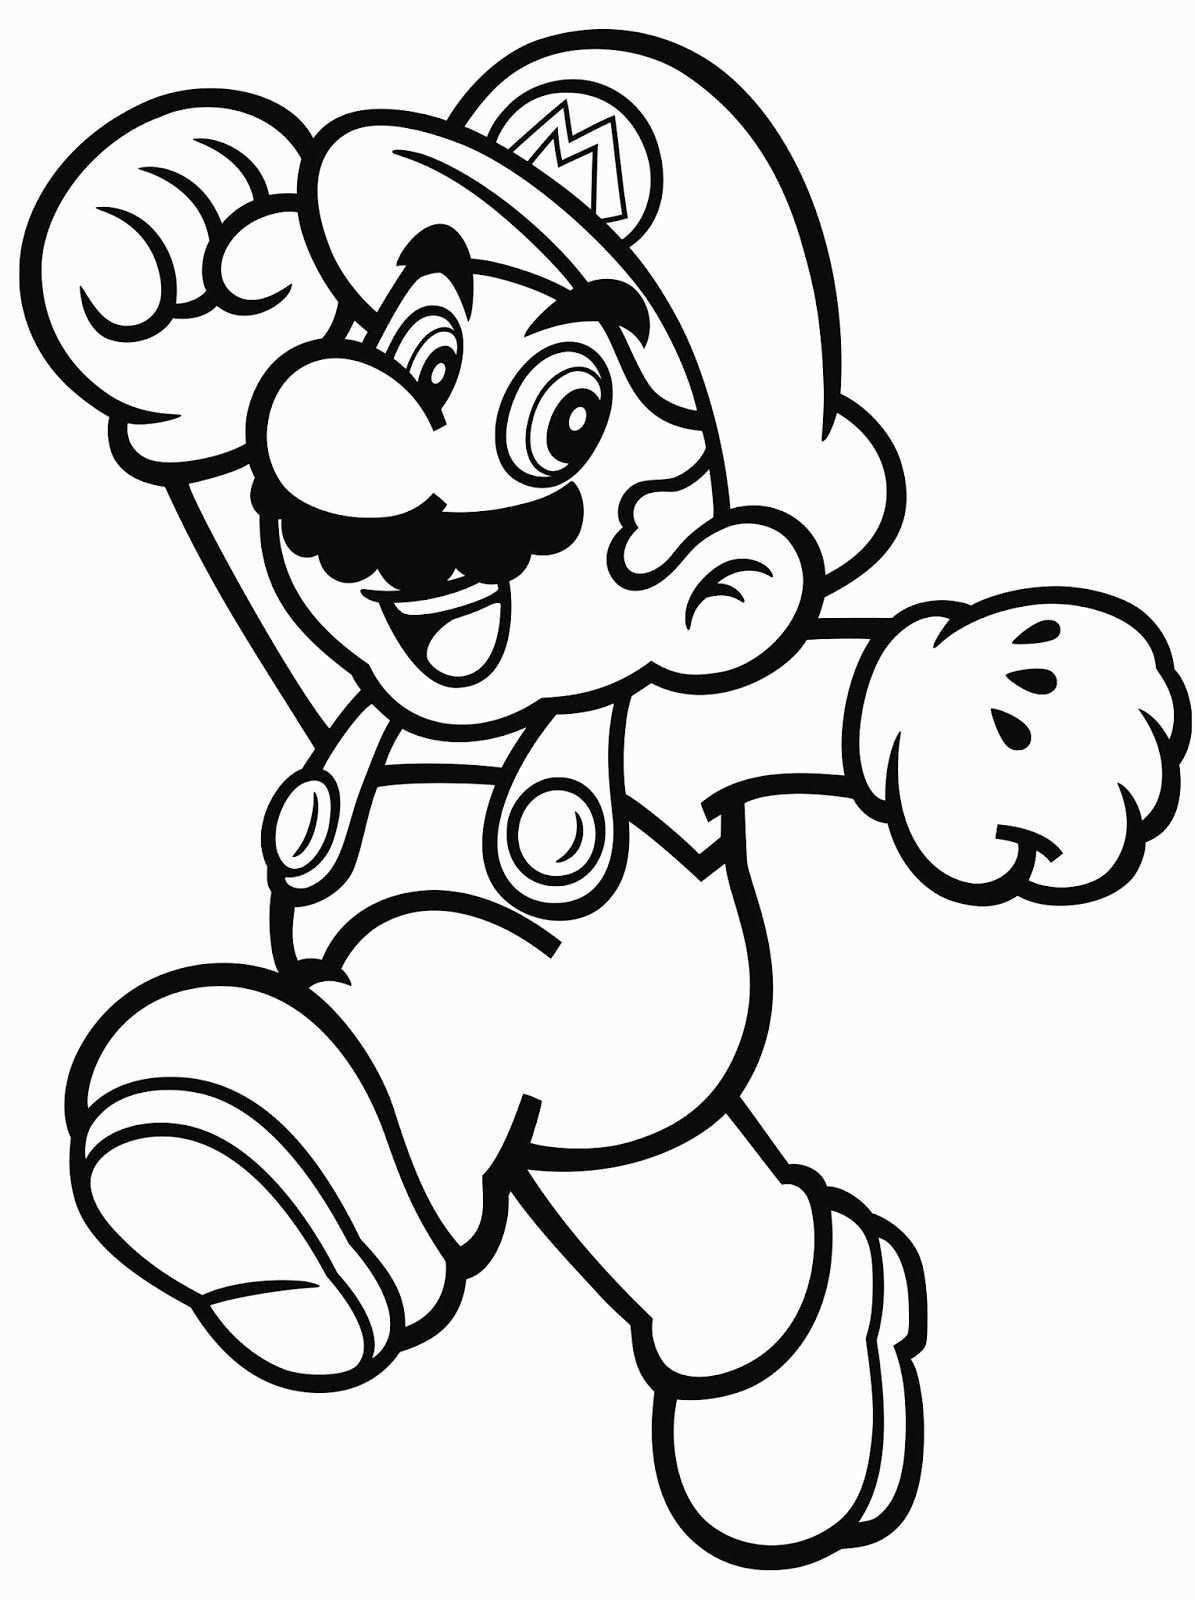 Super Mario Coloring Book Fresh Nintendo Launches Coloring Pages With Characters Mari